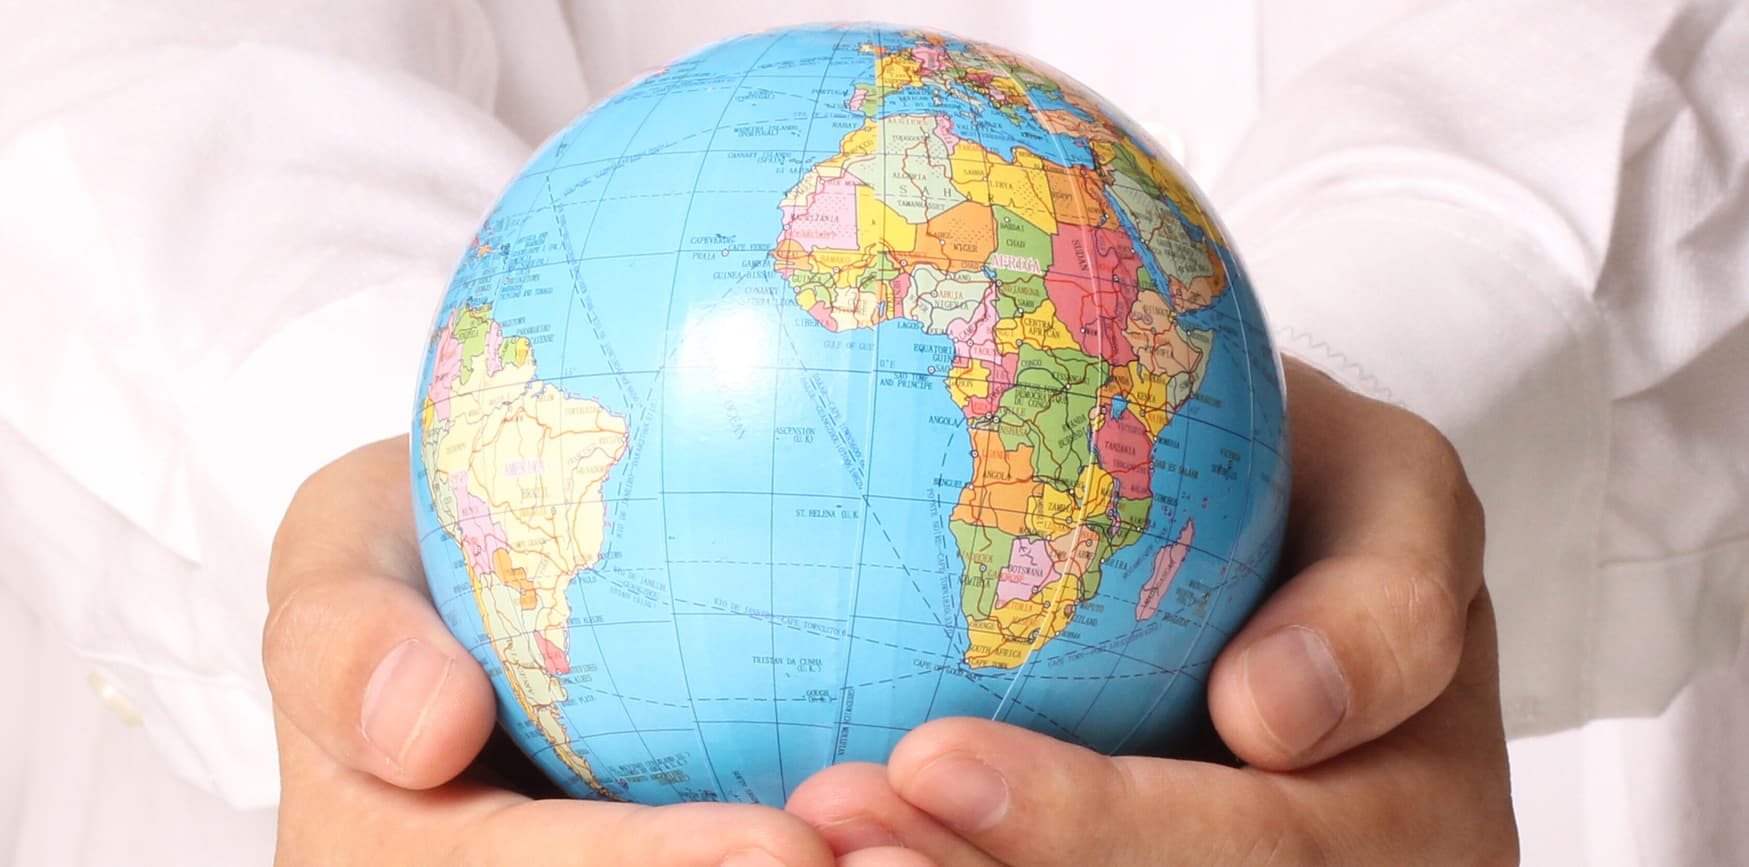 A person holding a globe in their hands.